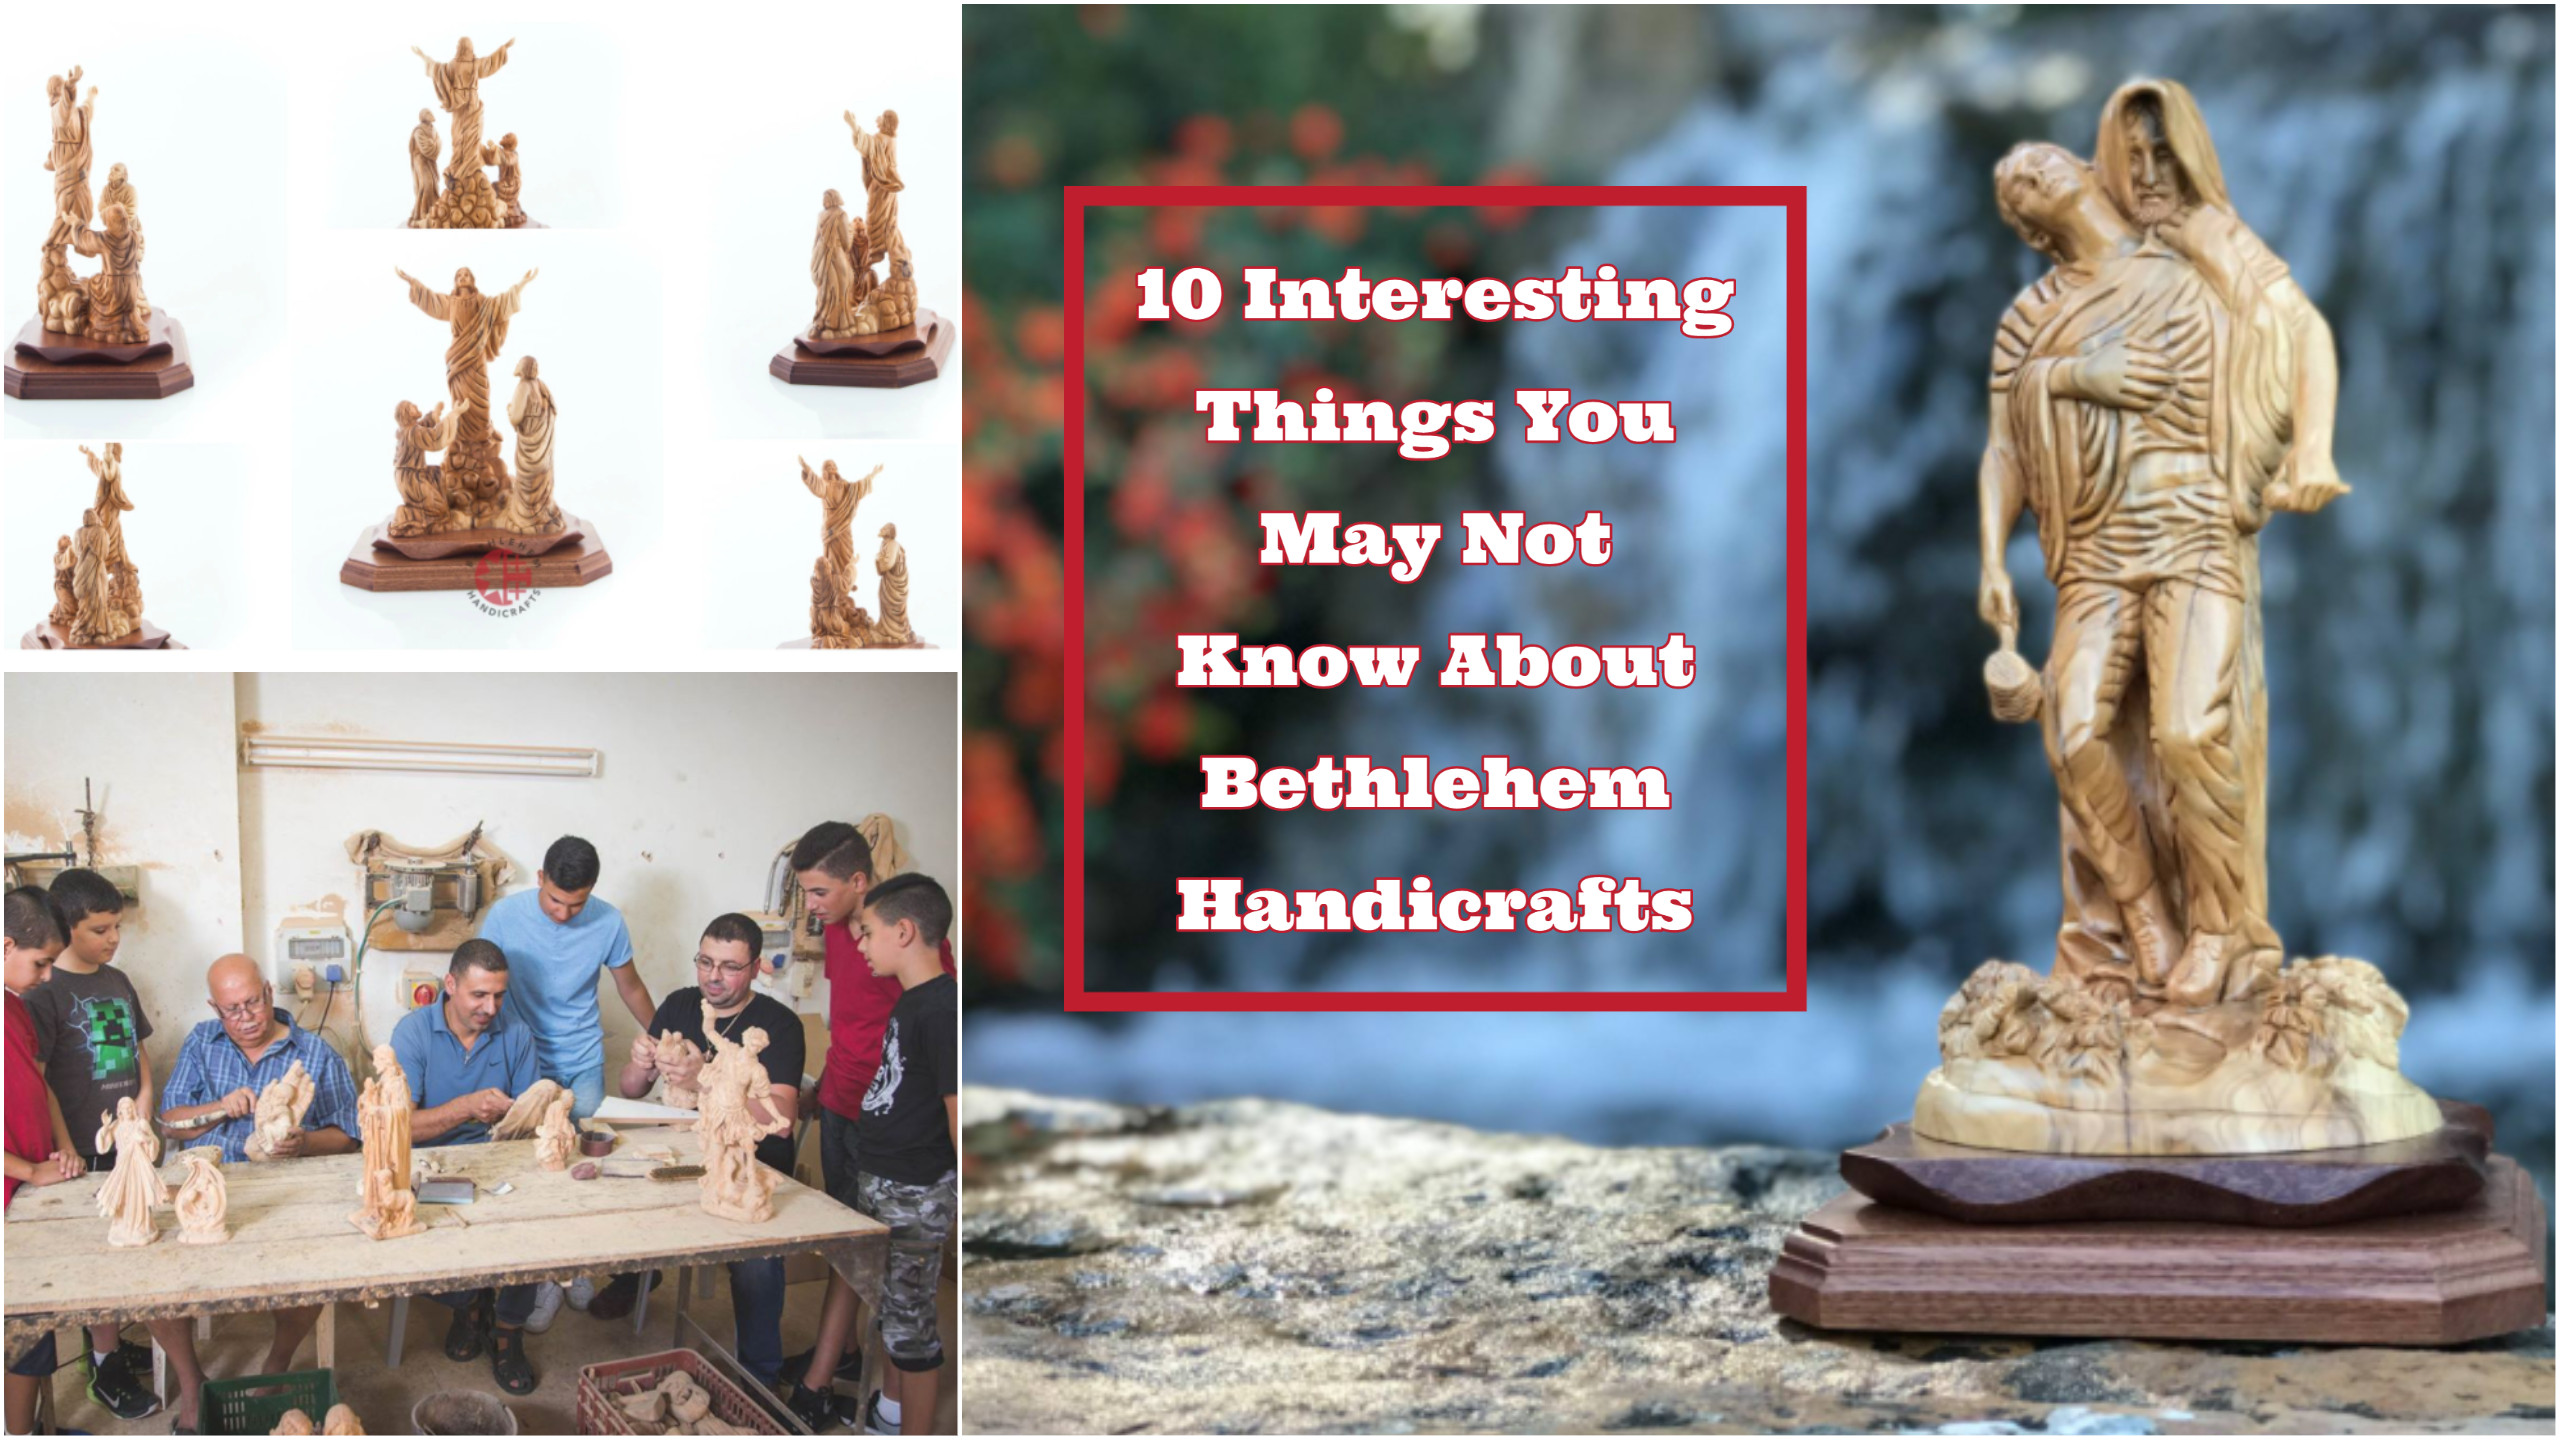 10 Interesting Things You May Not Know About Bethlehem Handicrafts